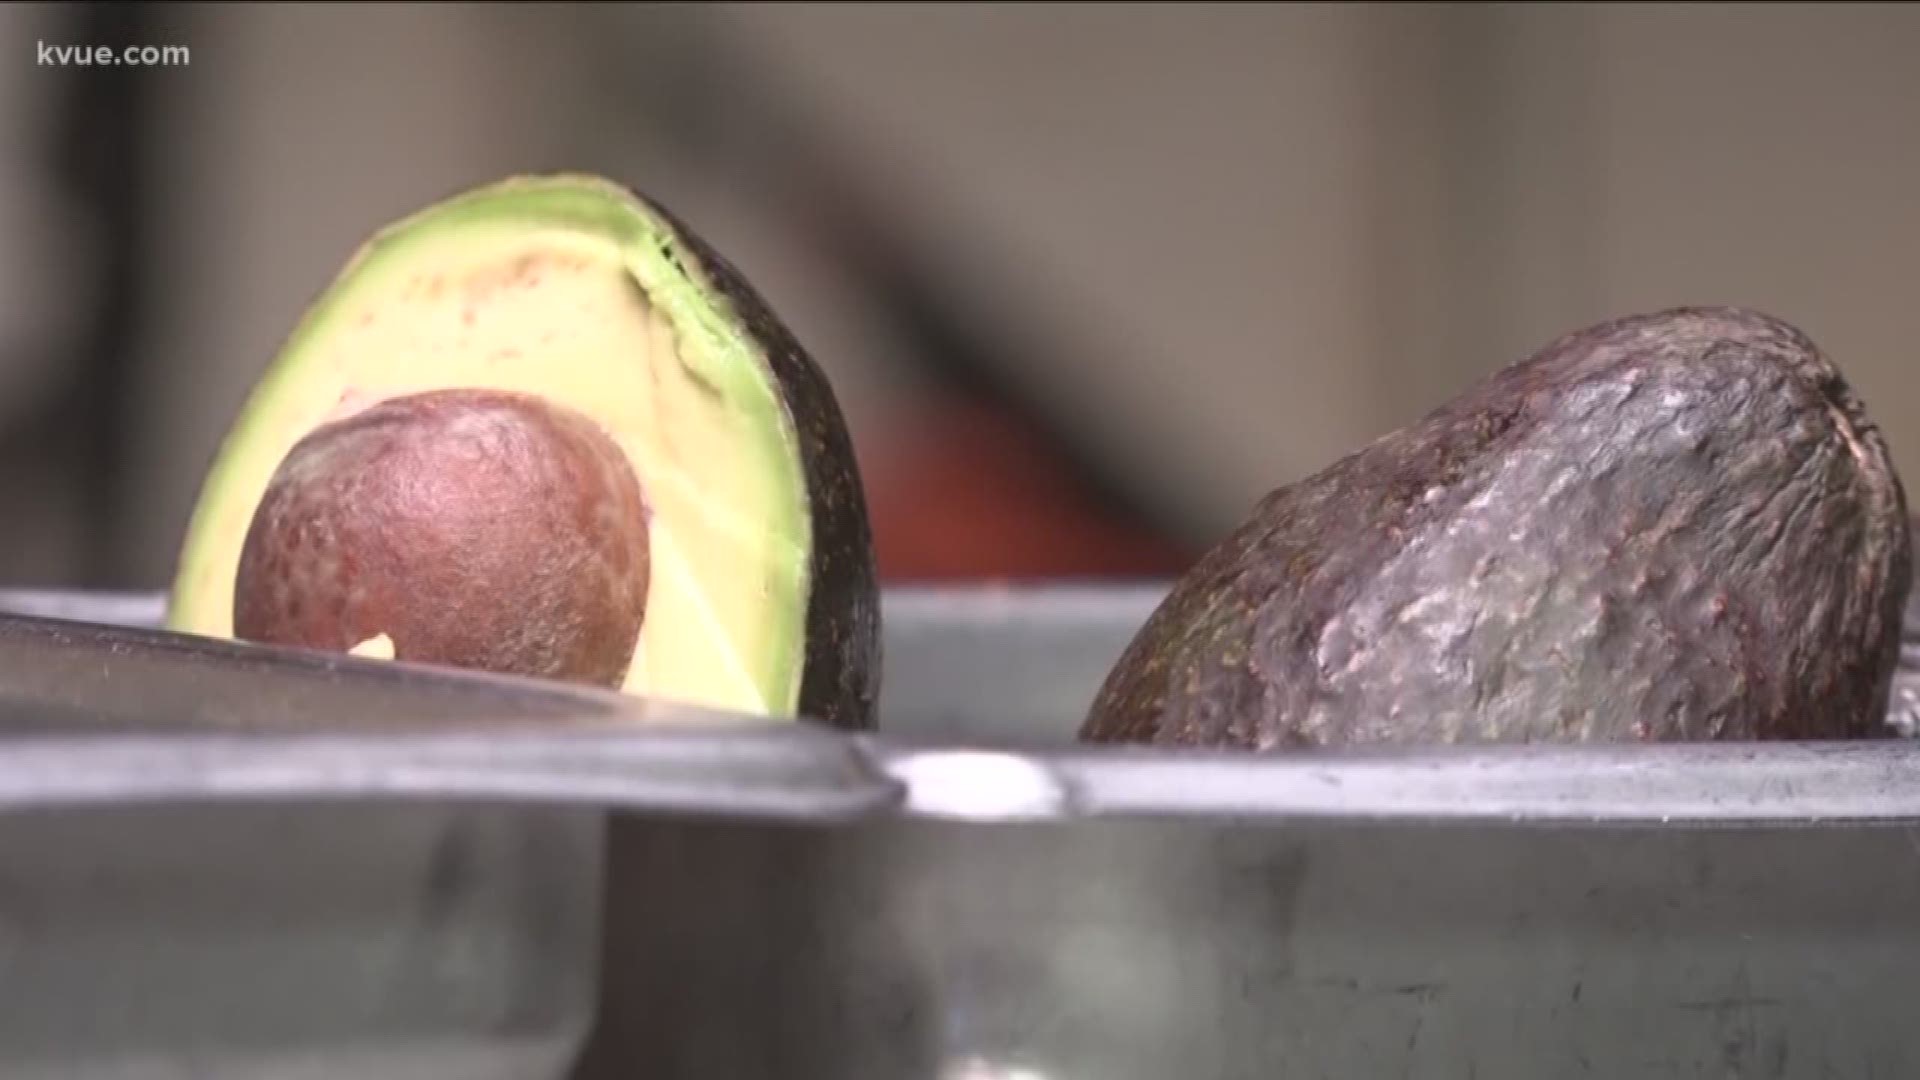 Rising avocado prices are now affecting local restaurants. Wholesale prices for avocados from Mexico have more than doubled in the past month.